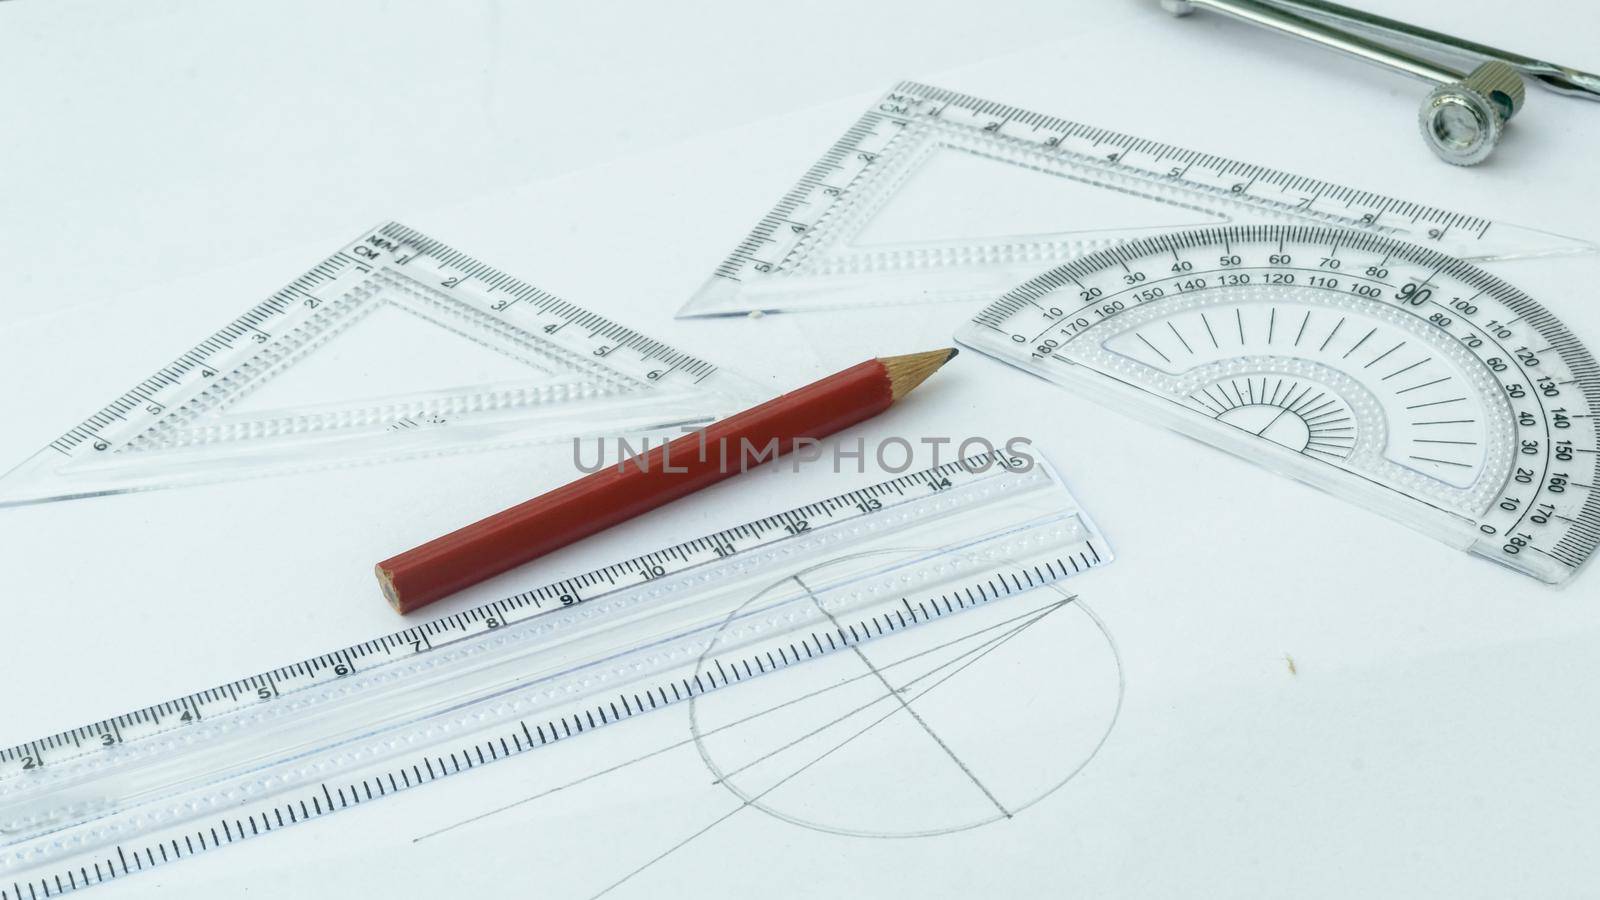 Design Professional services drawing tools close up